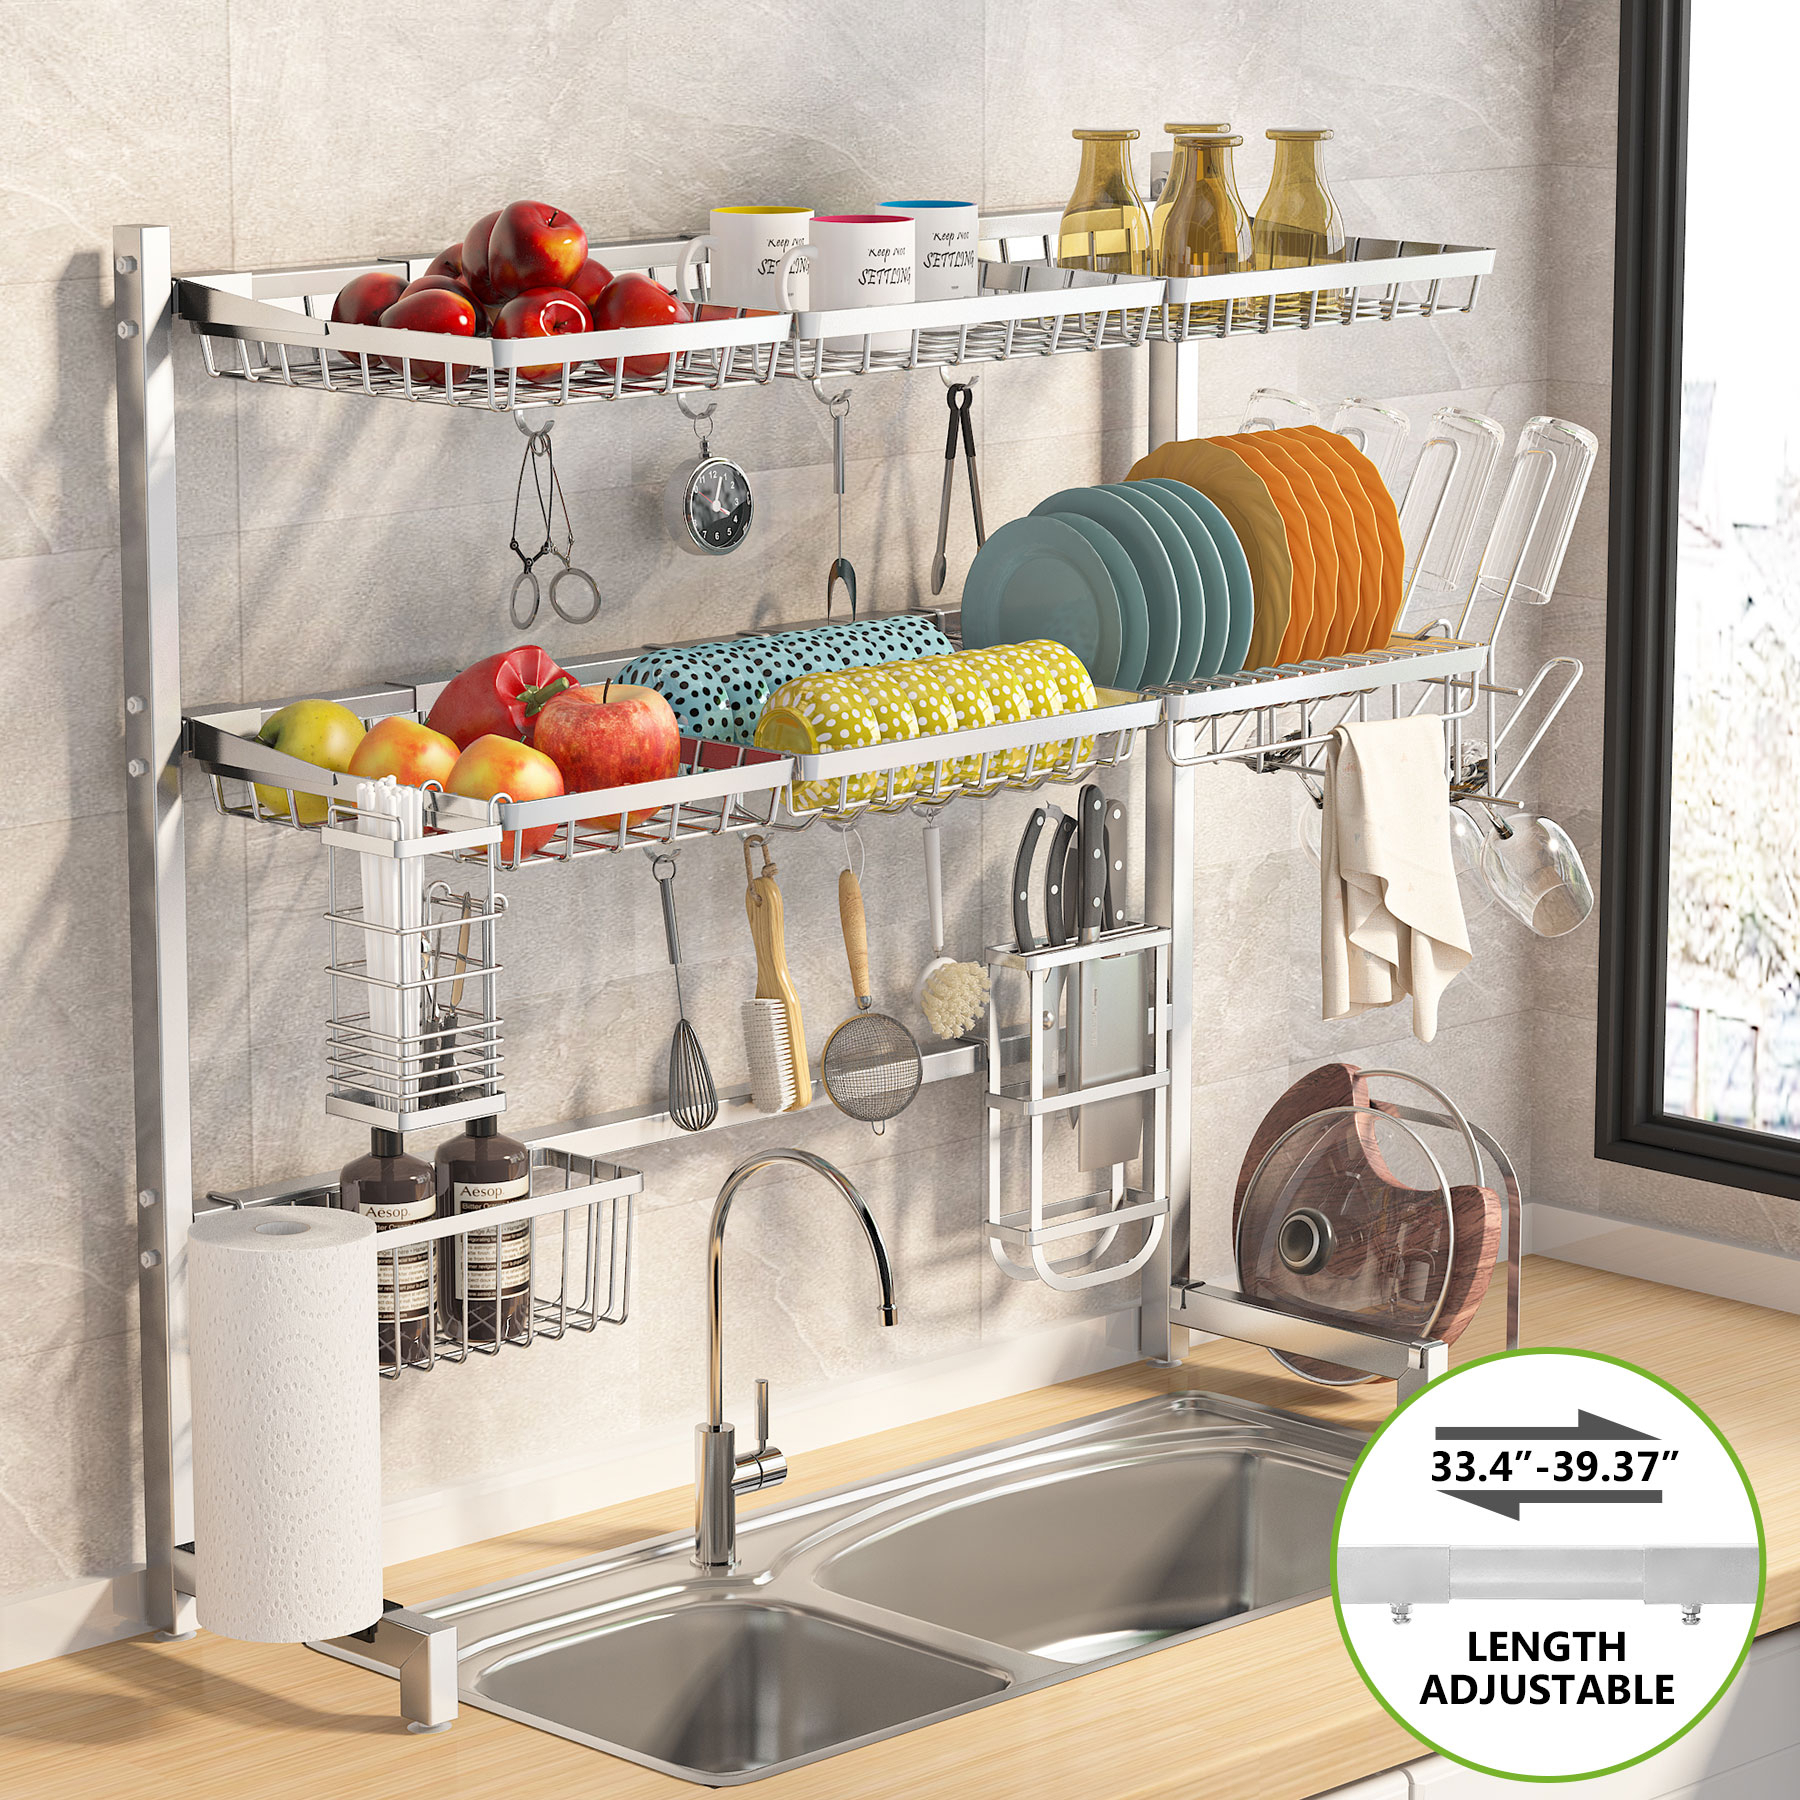 Over The Sink Dish Drying Rack -1Easylife 3 Tier Stainless Steel Large Kitchen Rack Dish Drainers for Home Kitchen Counter Storage - Silver